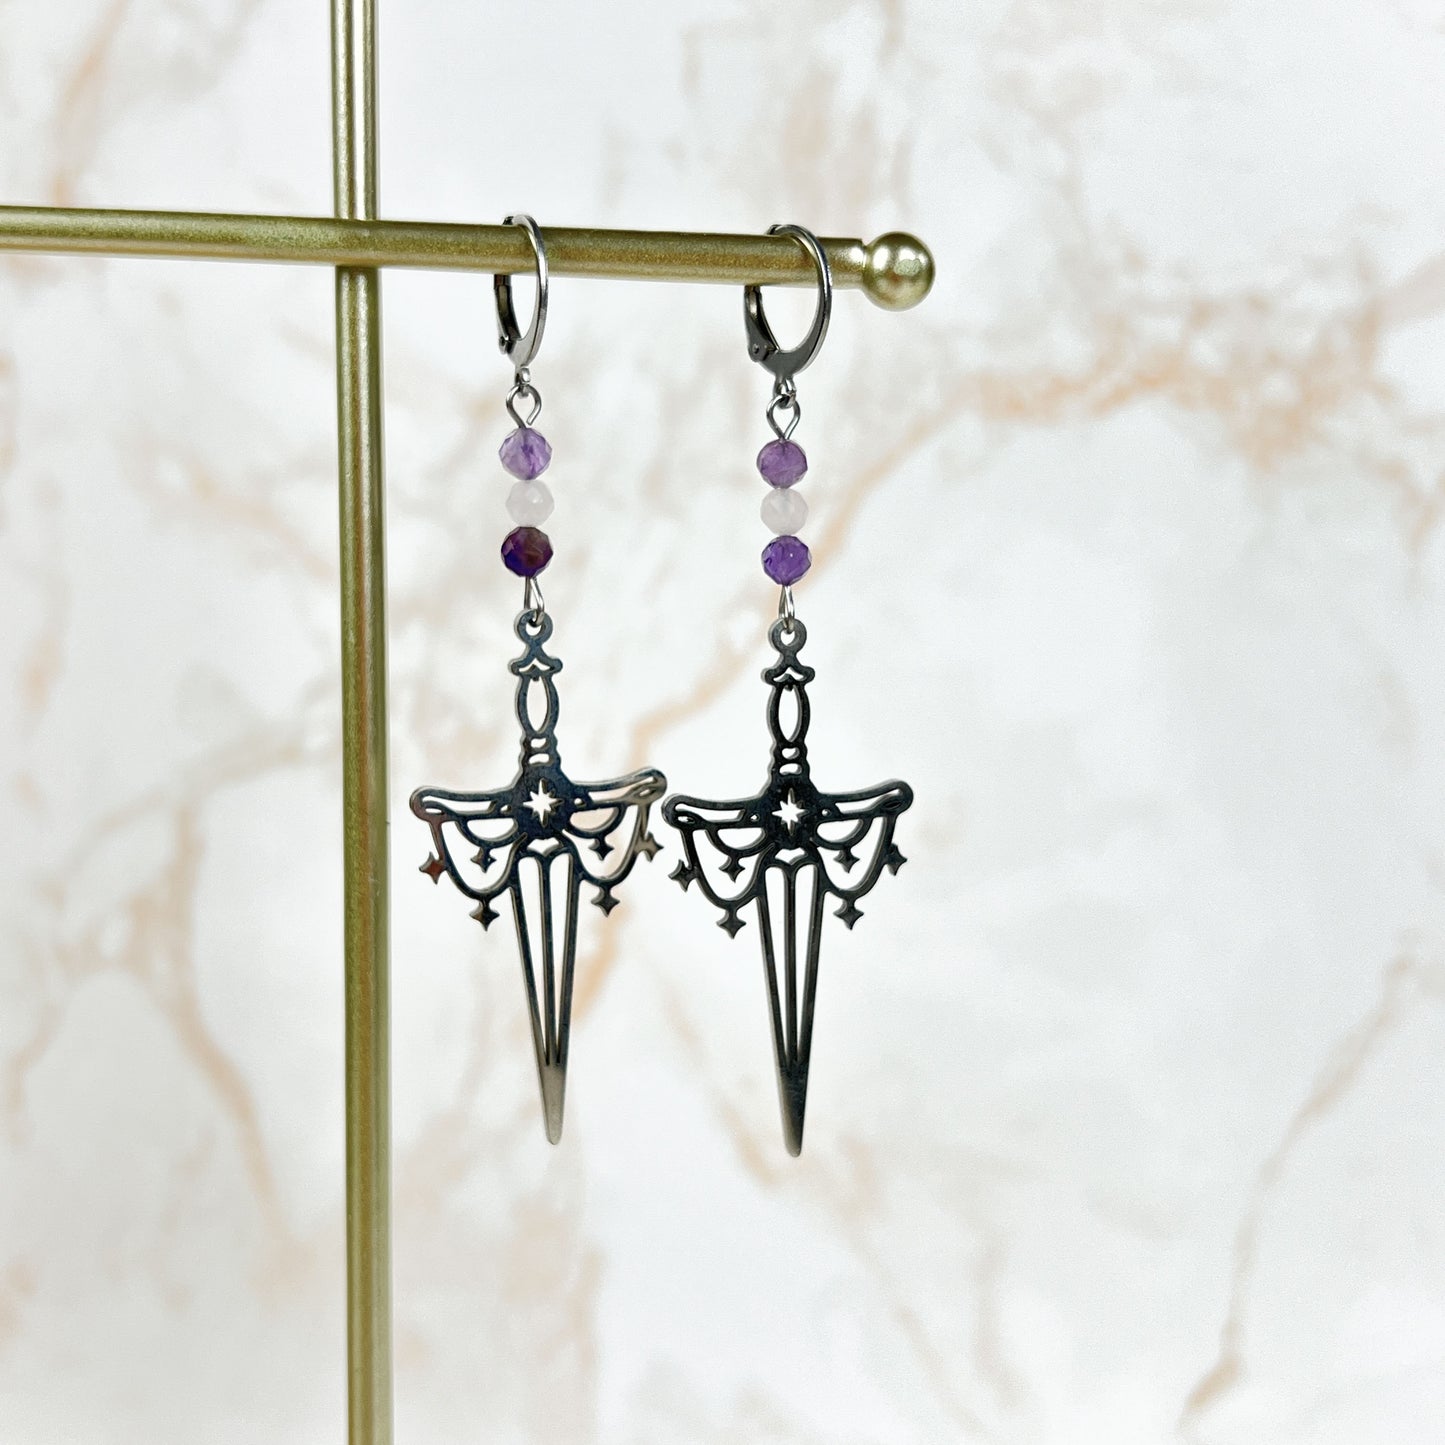 Gemstone sword earrings, stainless steel and faceted beads